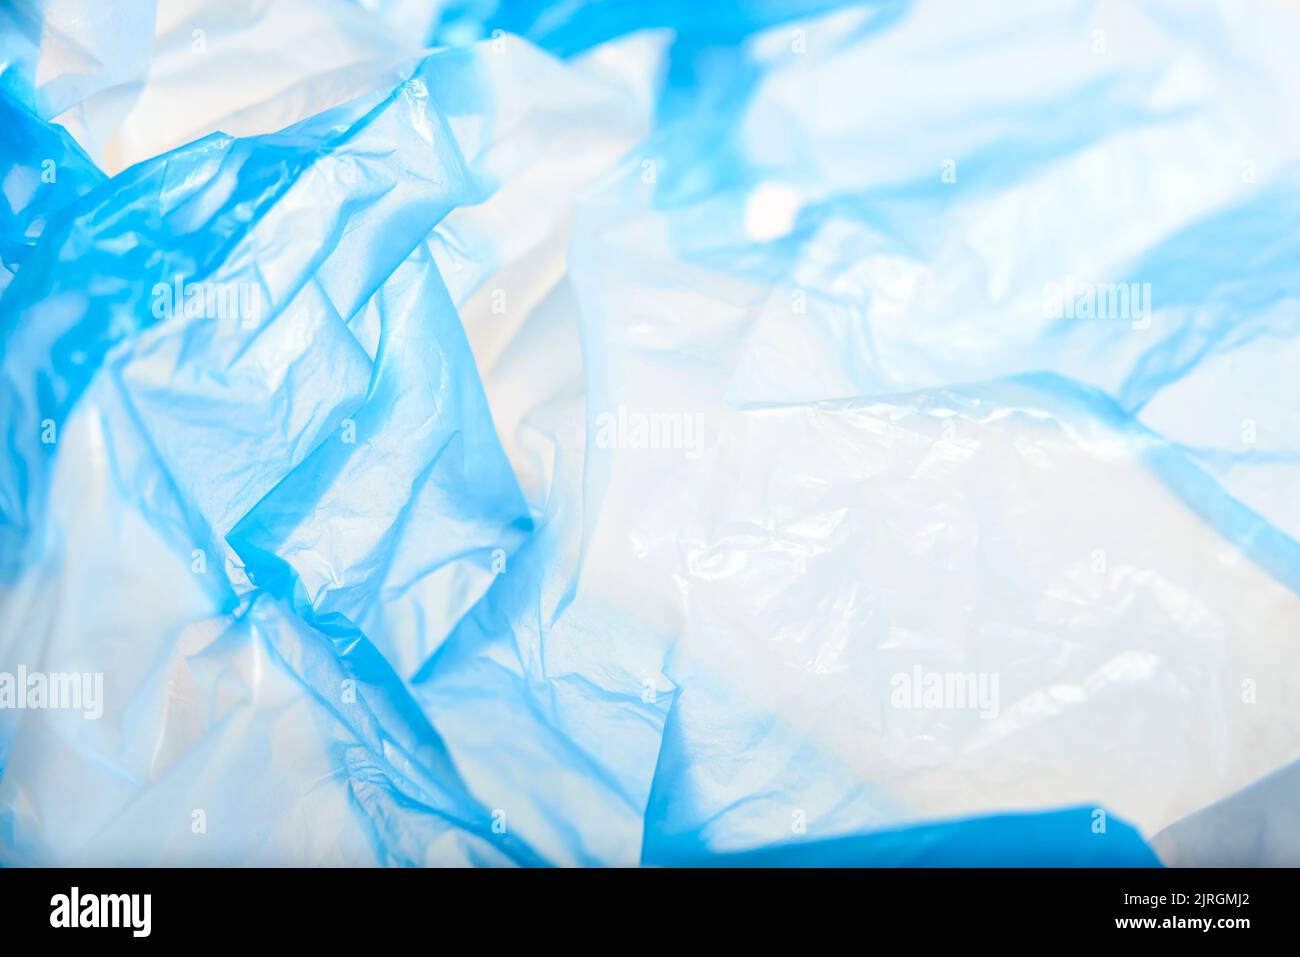 White and blue plastic background, wrinkled single use bag. Concepts: sustainability, recycling, pollution. Stock Photo